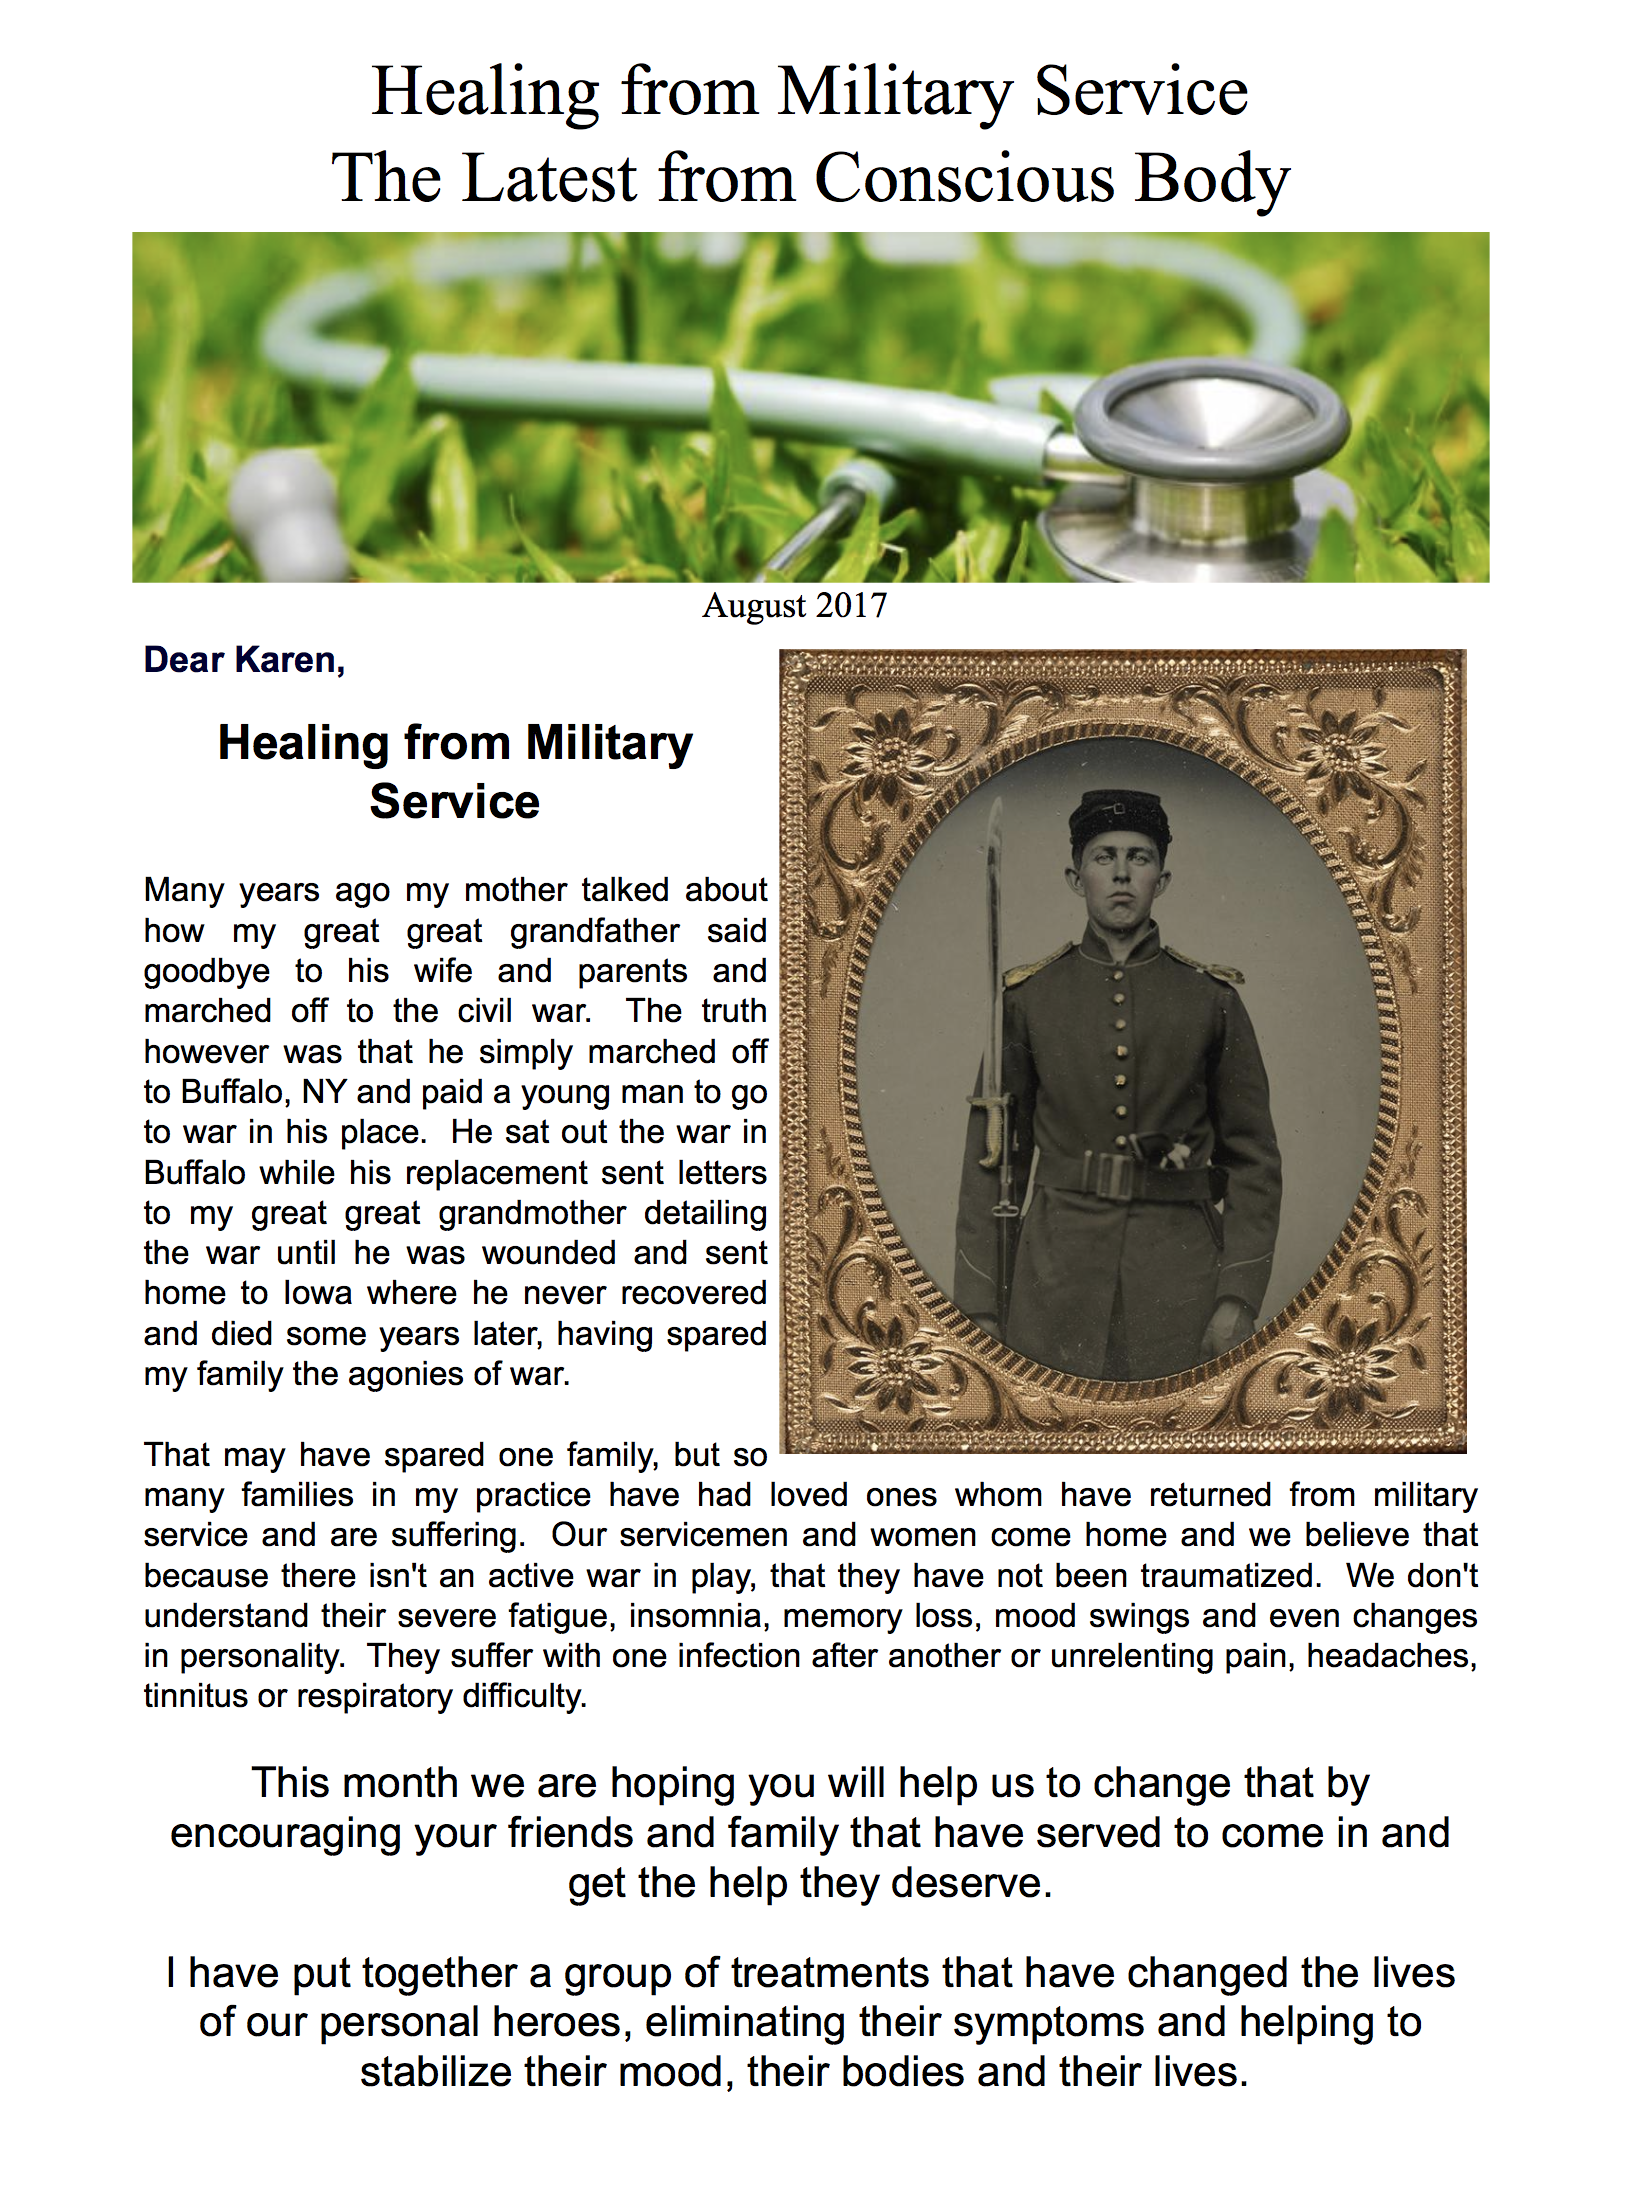 Healing Our Military Newsletter August 2017